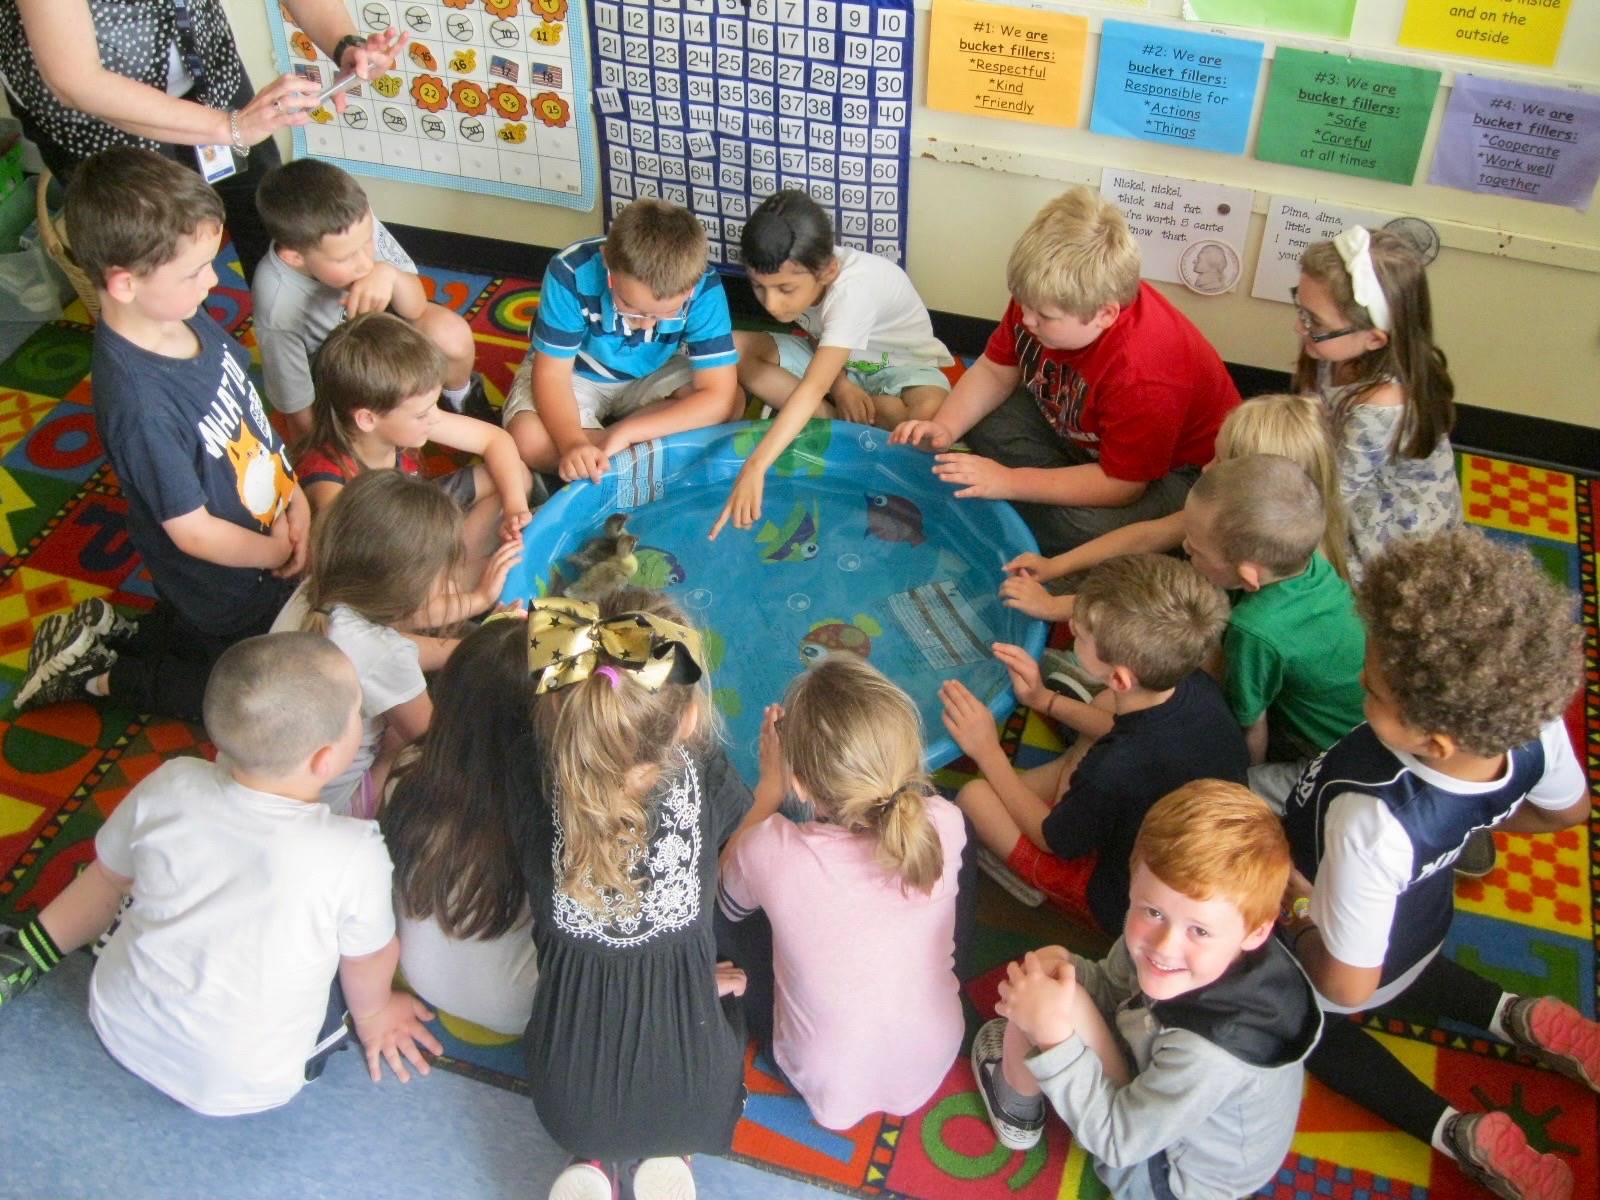 A class watches ducklings swim in a pool.